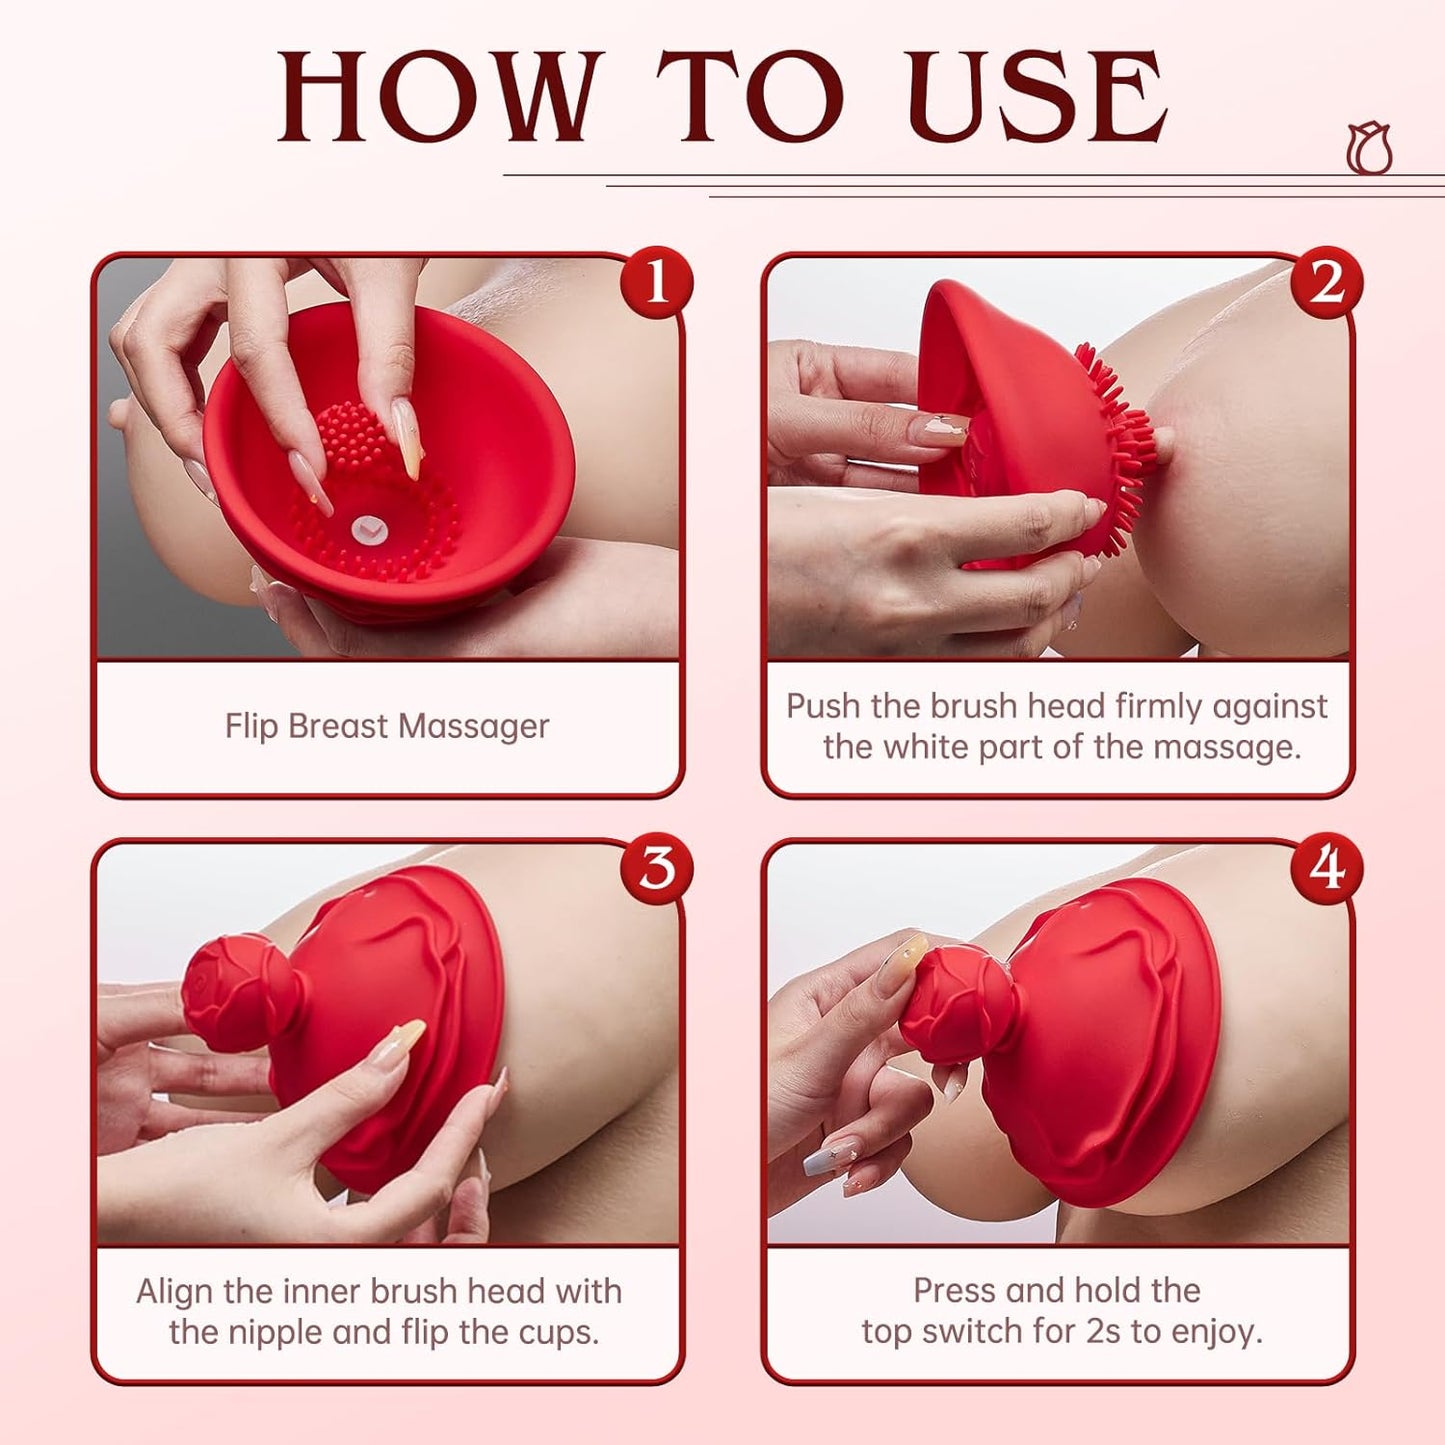 Sex Toys Nipple Toys Rotation - Rose Sex Toy Sucking Stimulator Wireless Nipple Clamps with 10 Powerful Vibration Rotation Modes, Rechargeable Adult Sex Toys for Women Couples Pleasure Red